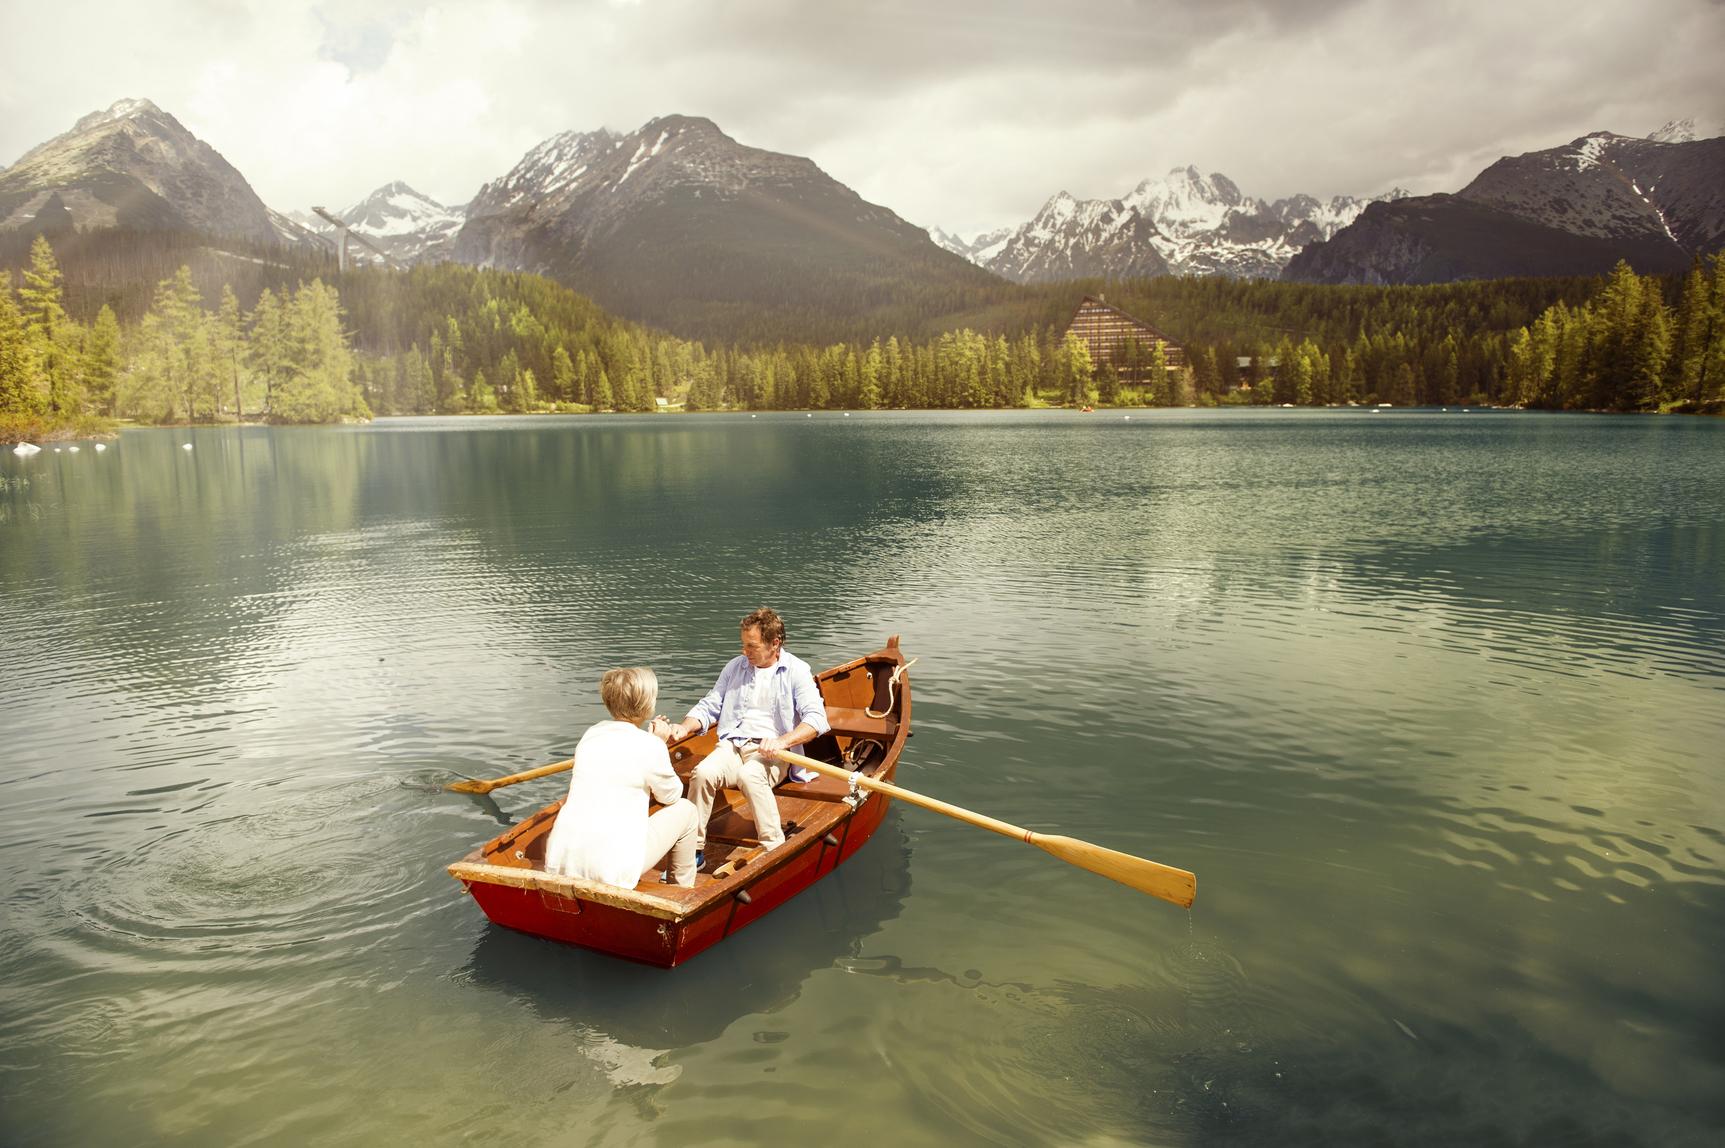 Couple paddling on boat with mountains in the distance